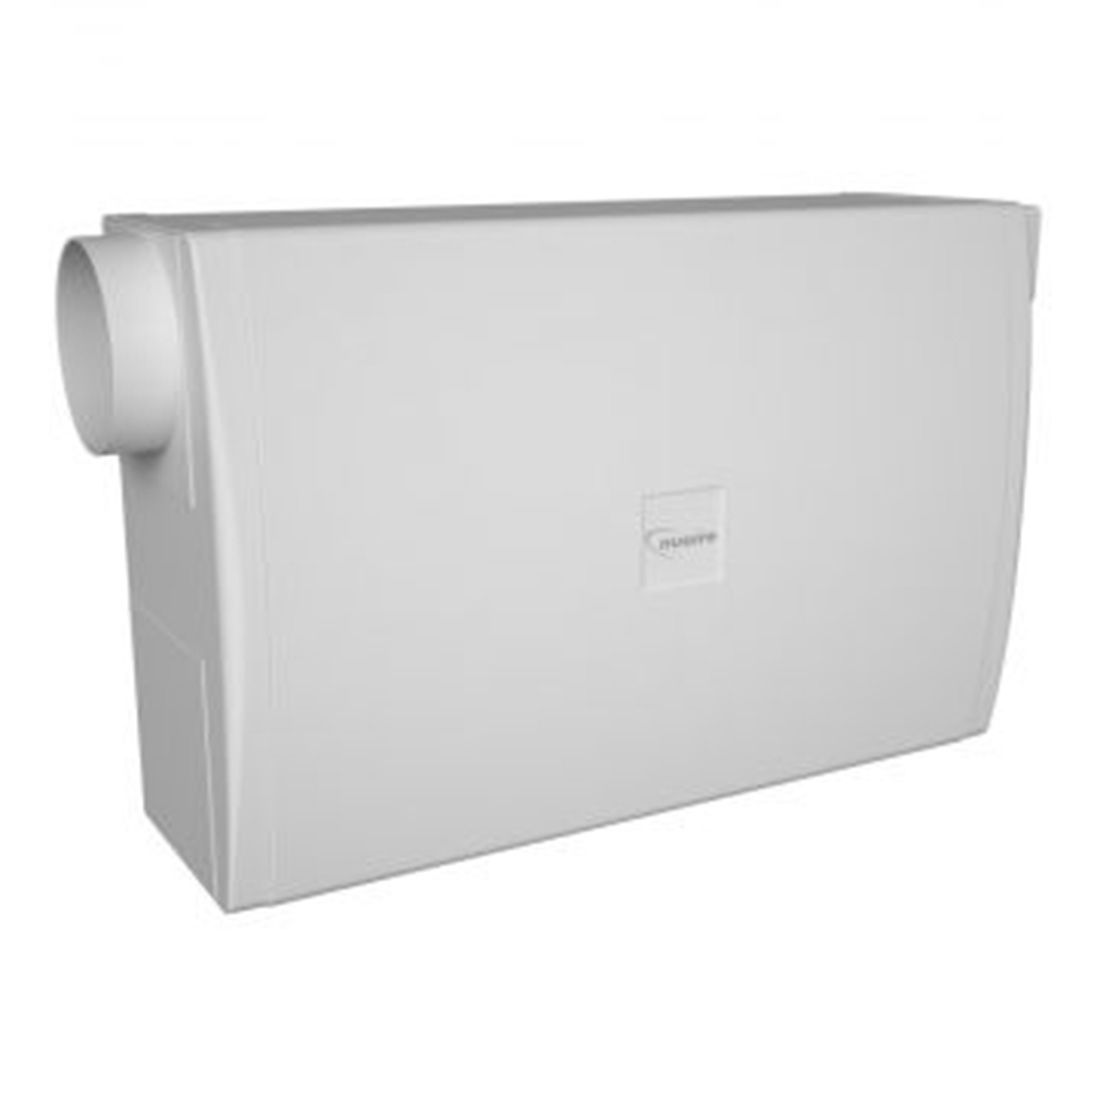 Flat Master 2000R Wall Mounted Positive Input Ventilation System